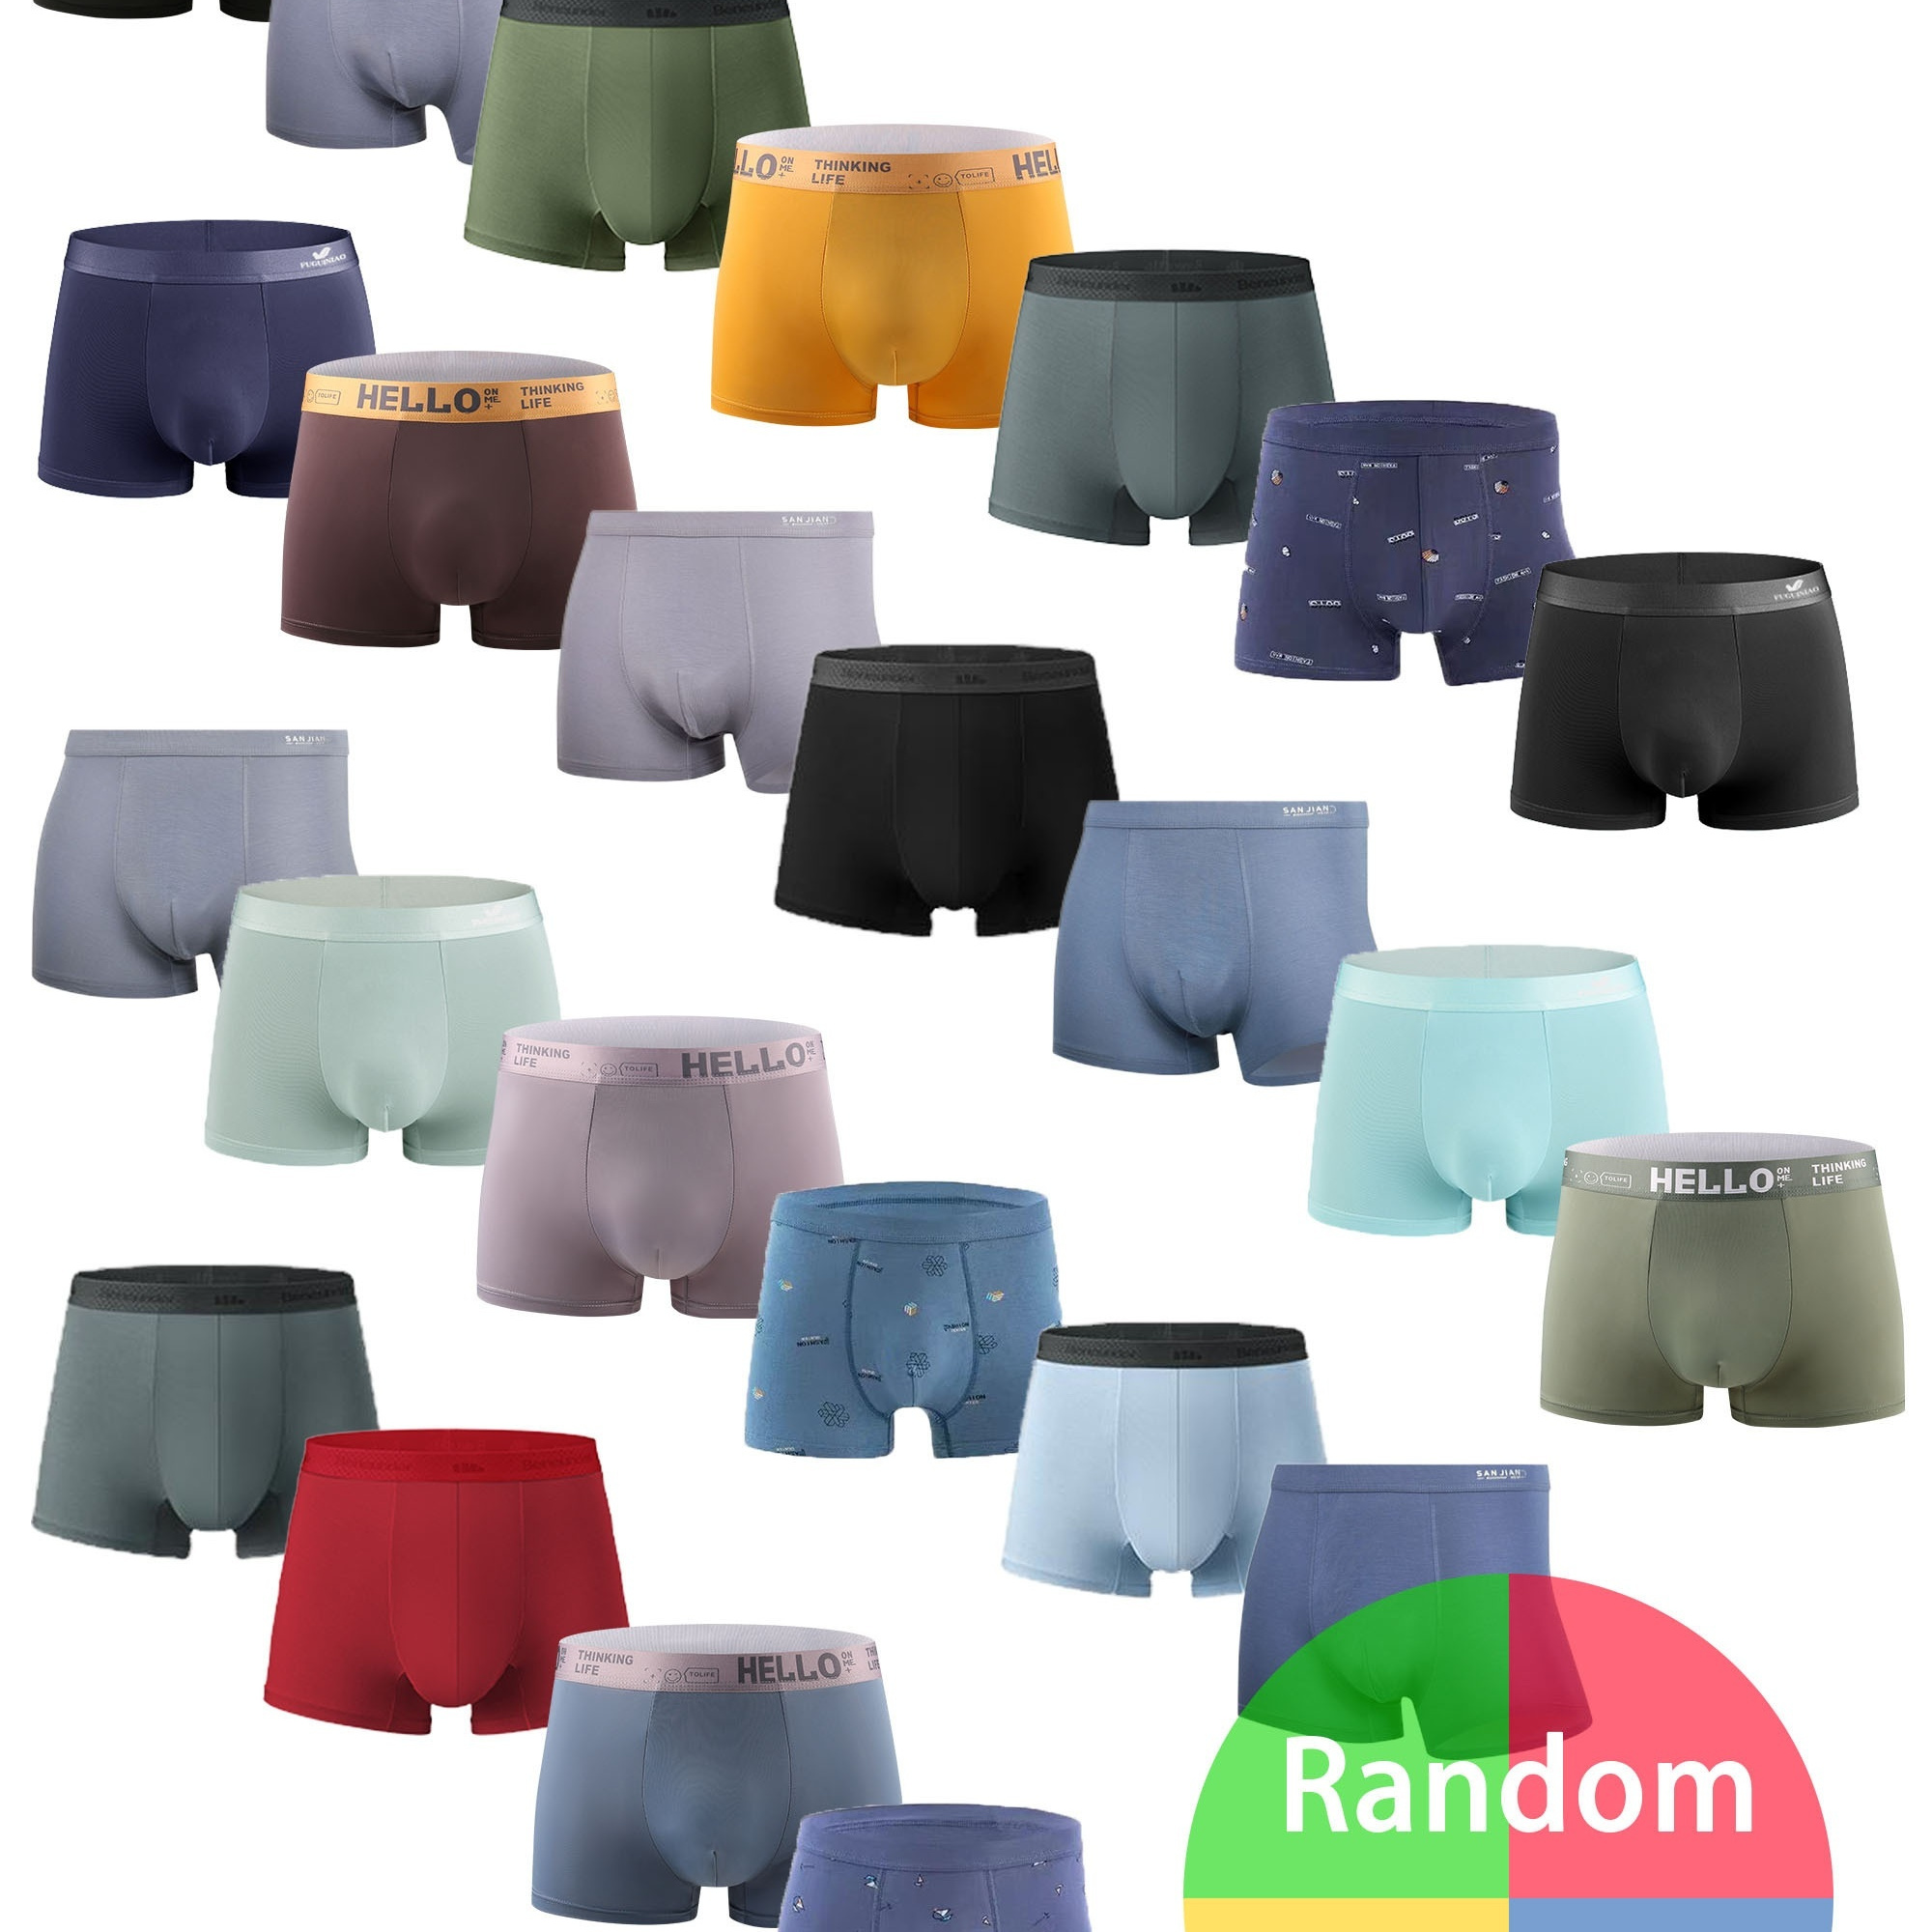 

10pcs Random Colors Men's Solid Color Hello Letter Long Boxer Briefs Shorts, Breathable Comfy Quick Drying Stretchy Boxer Trunks, Sports Trunks, Swim Trunks For Beach Pool, Men's Novelty Underwear